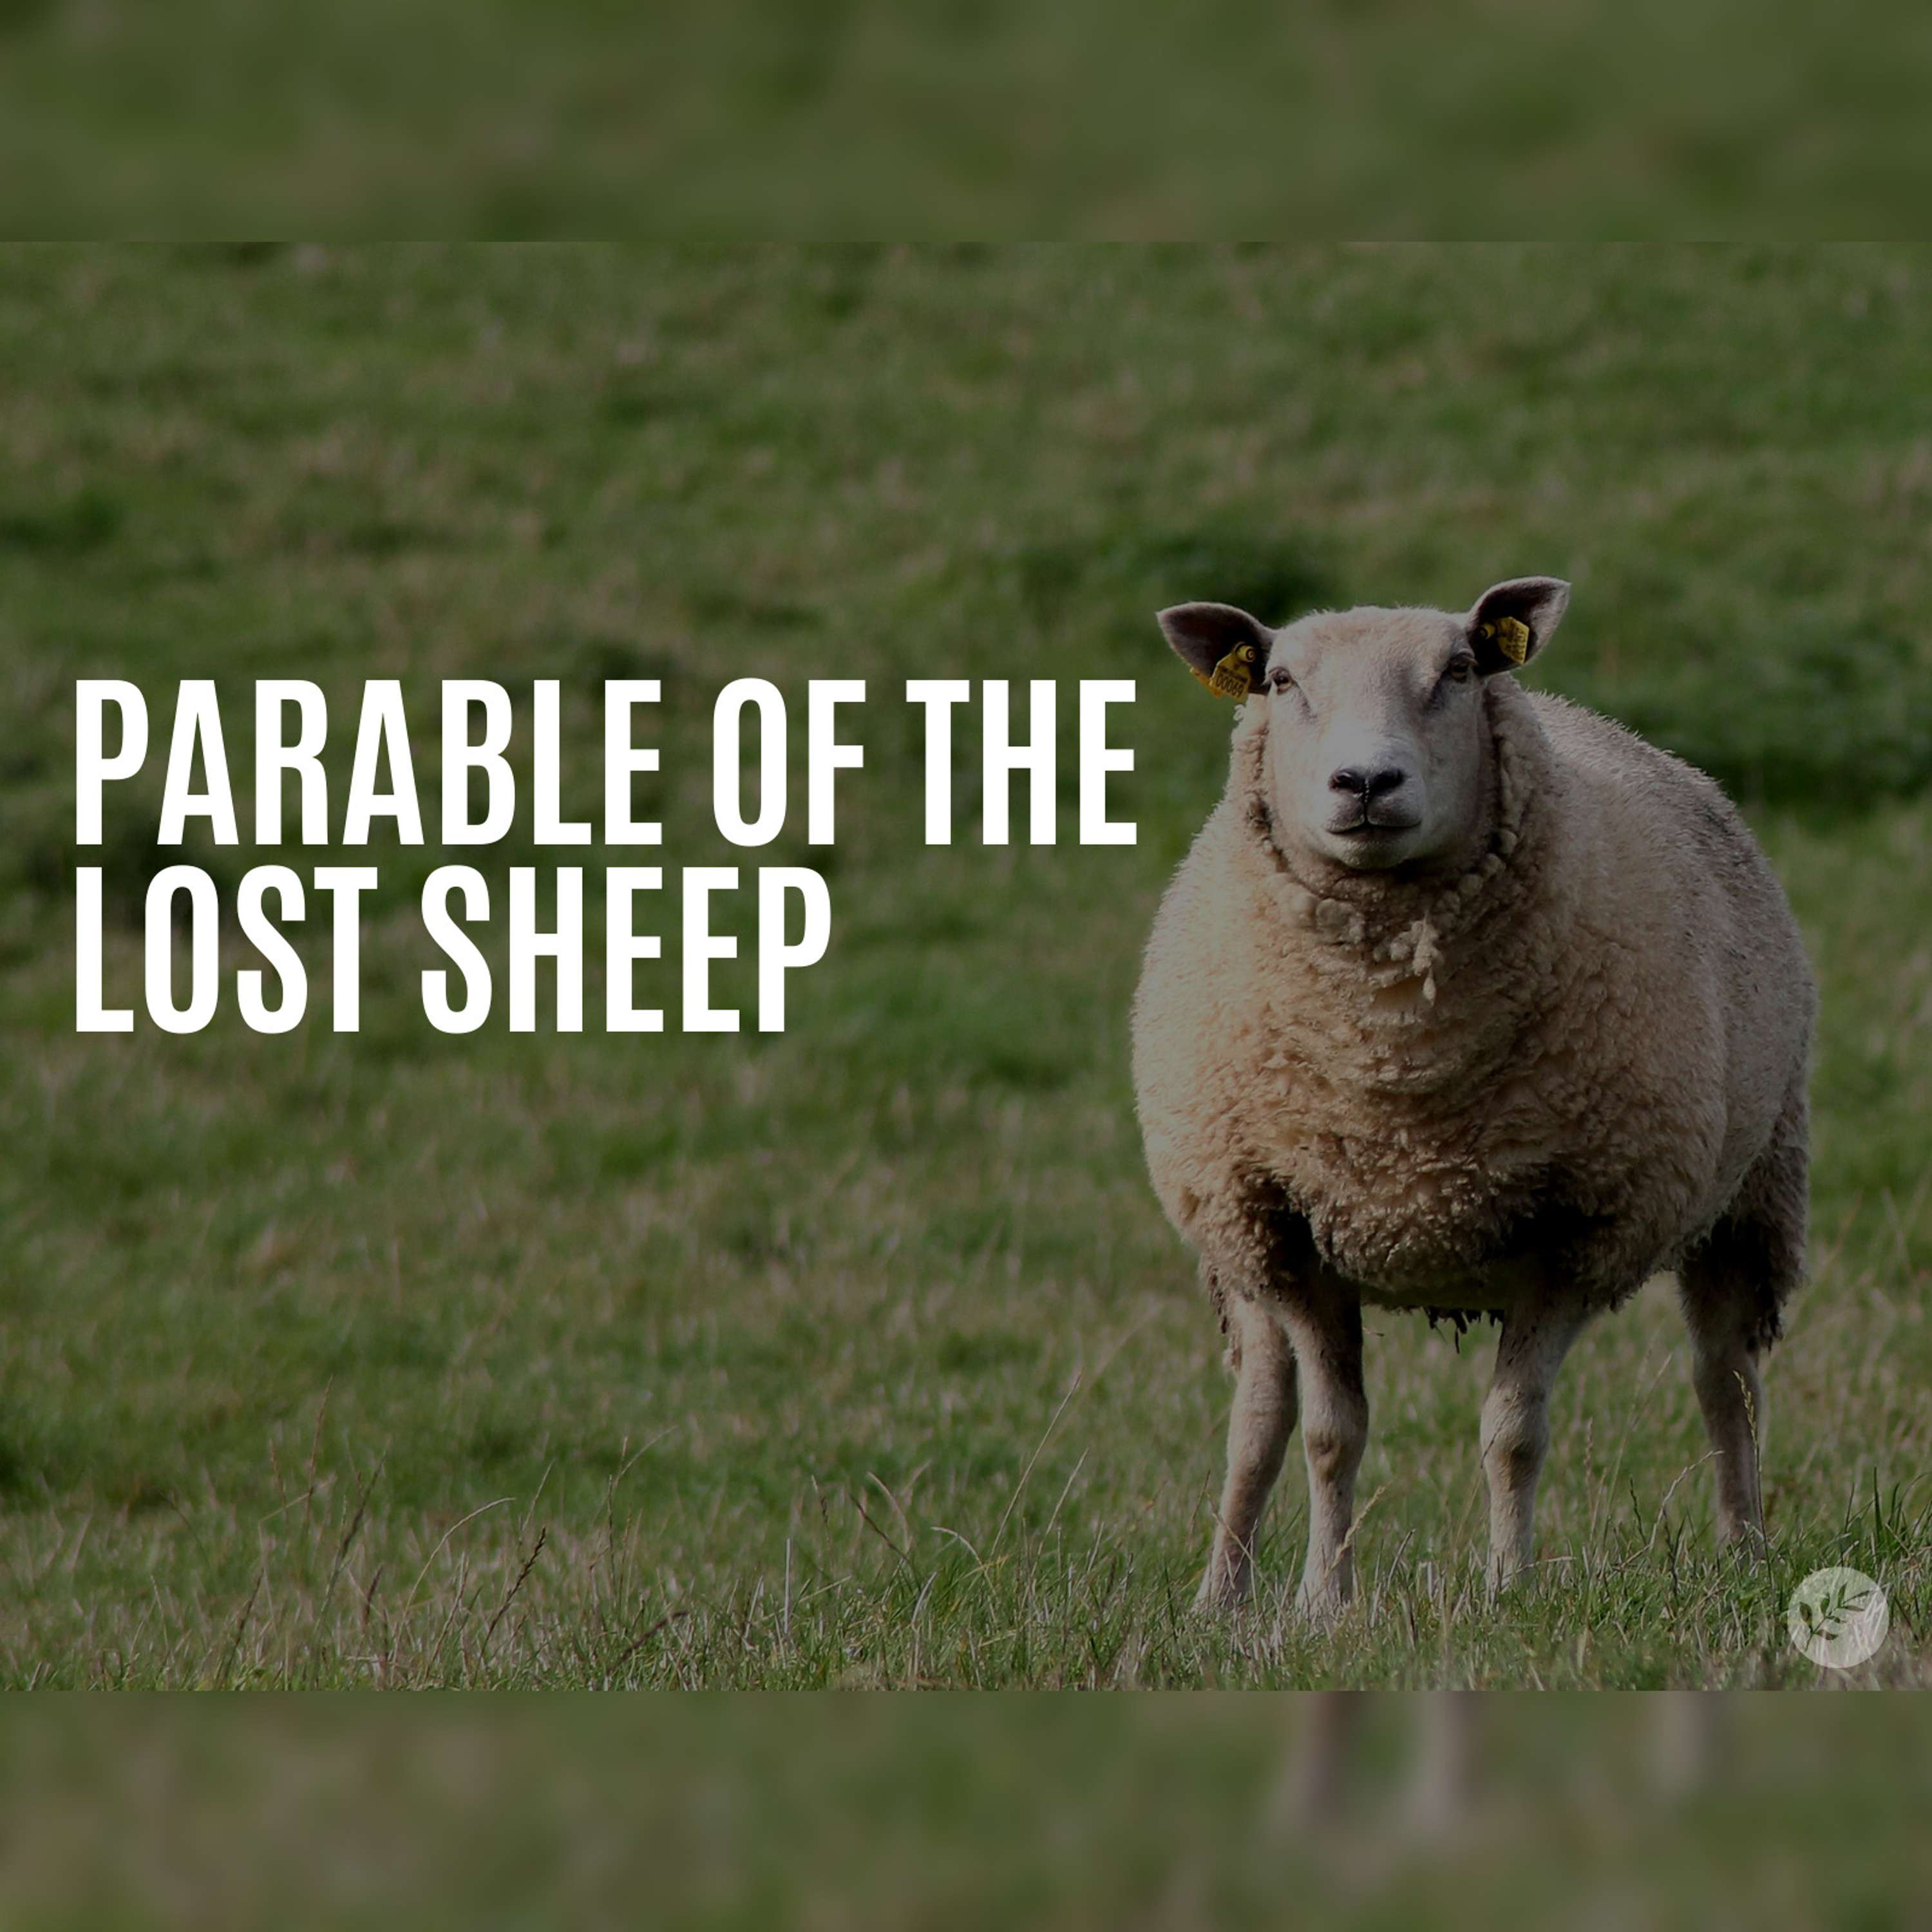 The Parable of the Lost Sheep | Luke 15:1-7